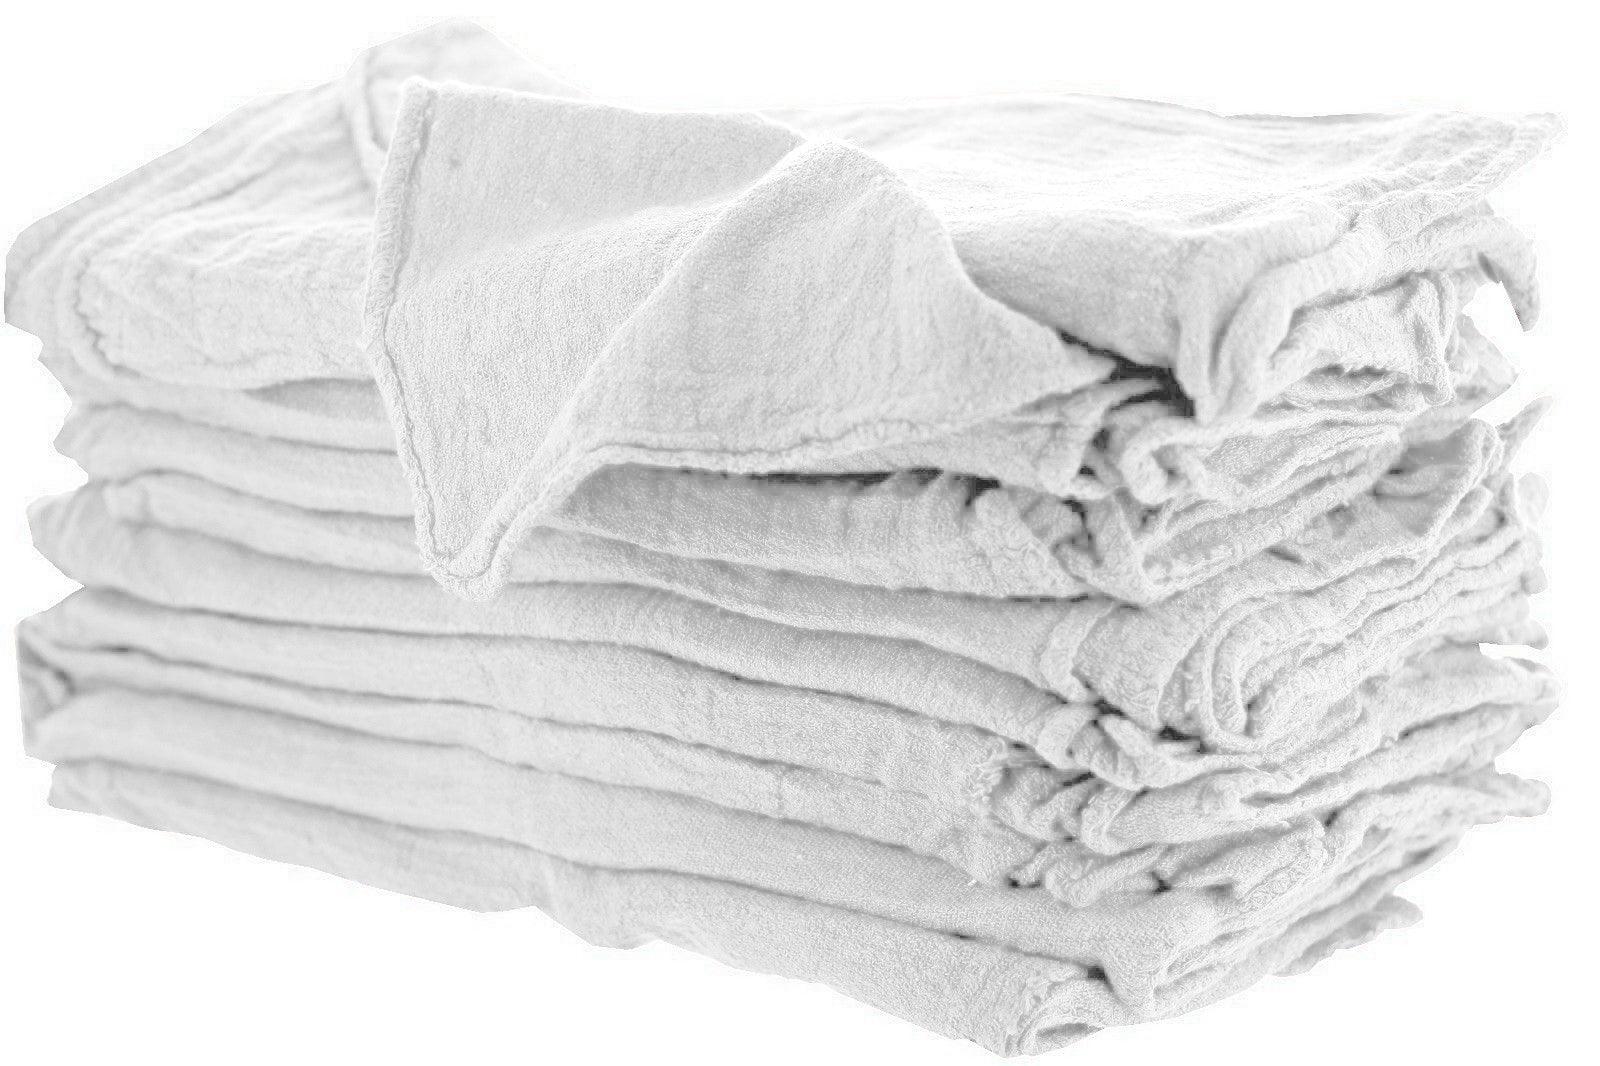 Cotton Homes Shop Towels Rags – Pack of 50 ($0.3/Each)- 12 X14 inch- Free 5 Shop Towels-Regenerated Cotton Multipurpose Cleaning Towels, Paint Cloth